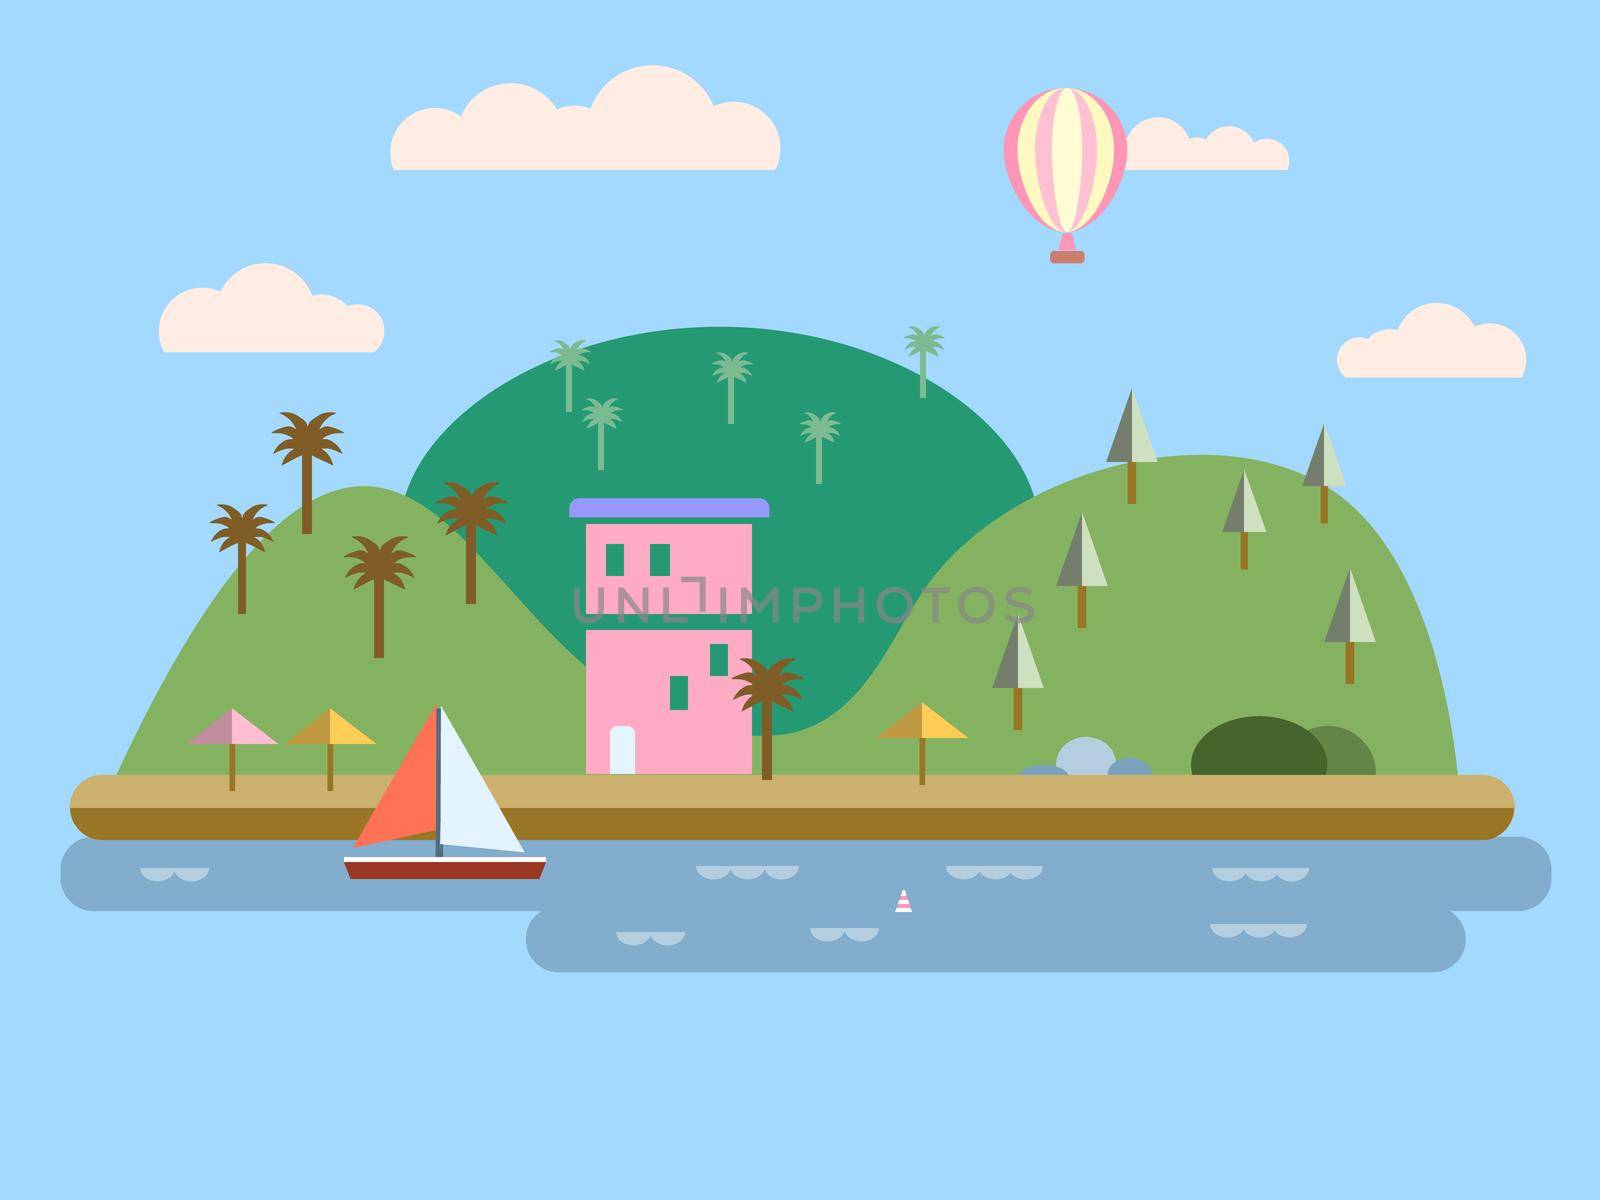 Islands, green hills, blue skies, water, trees, balloons, boat sails, home white cloud Modern flat design background design element